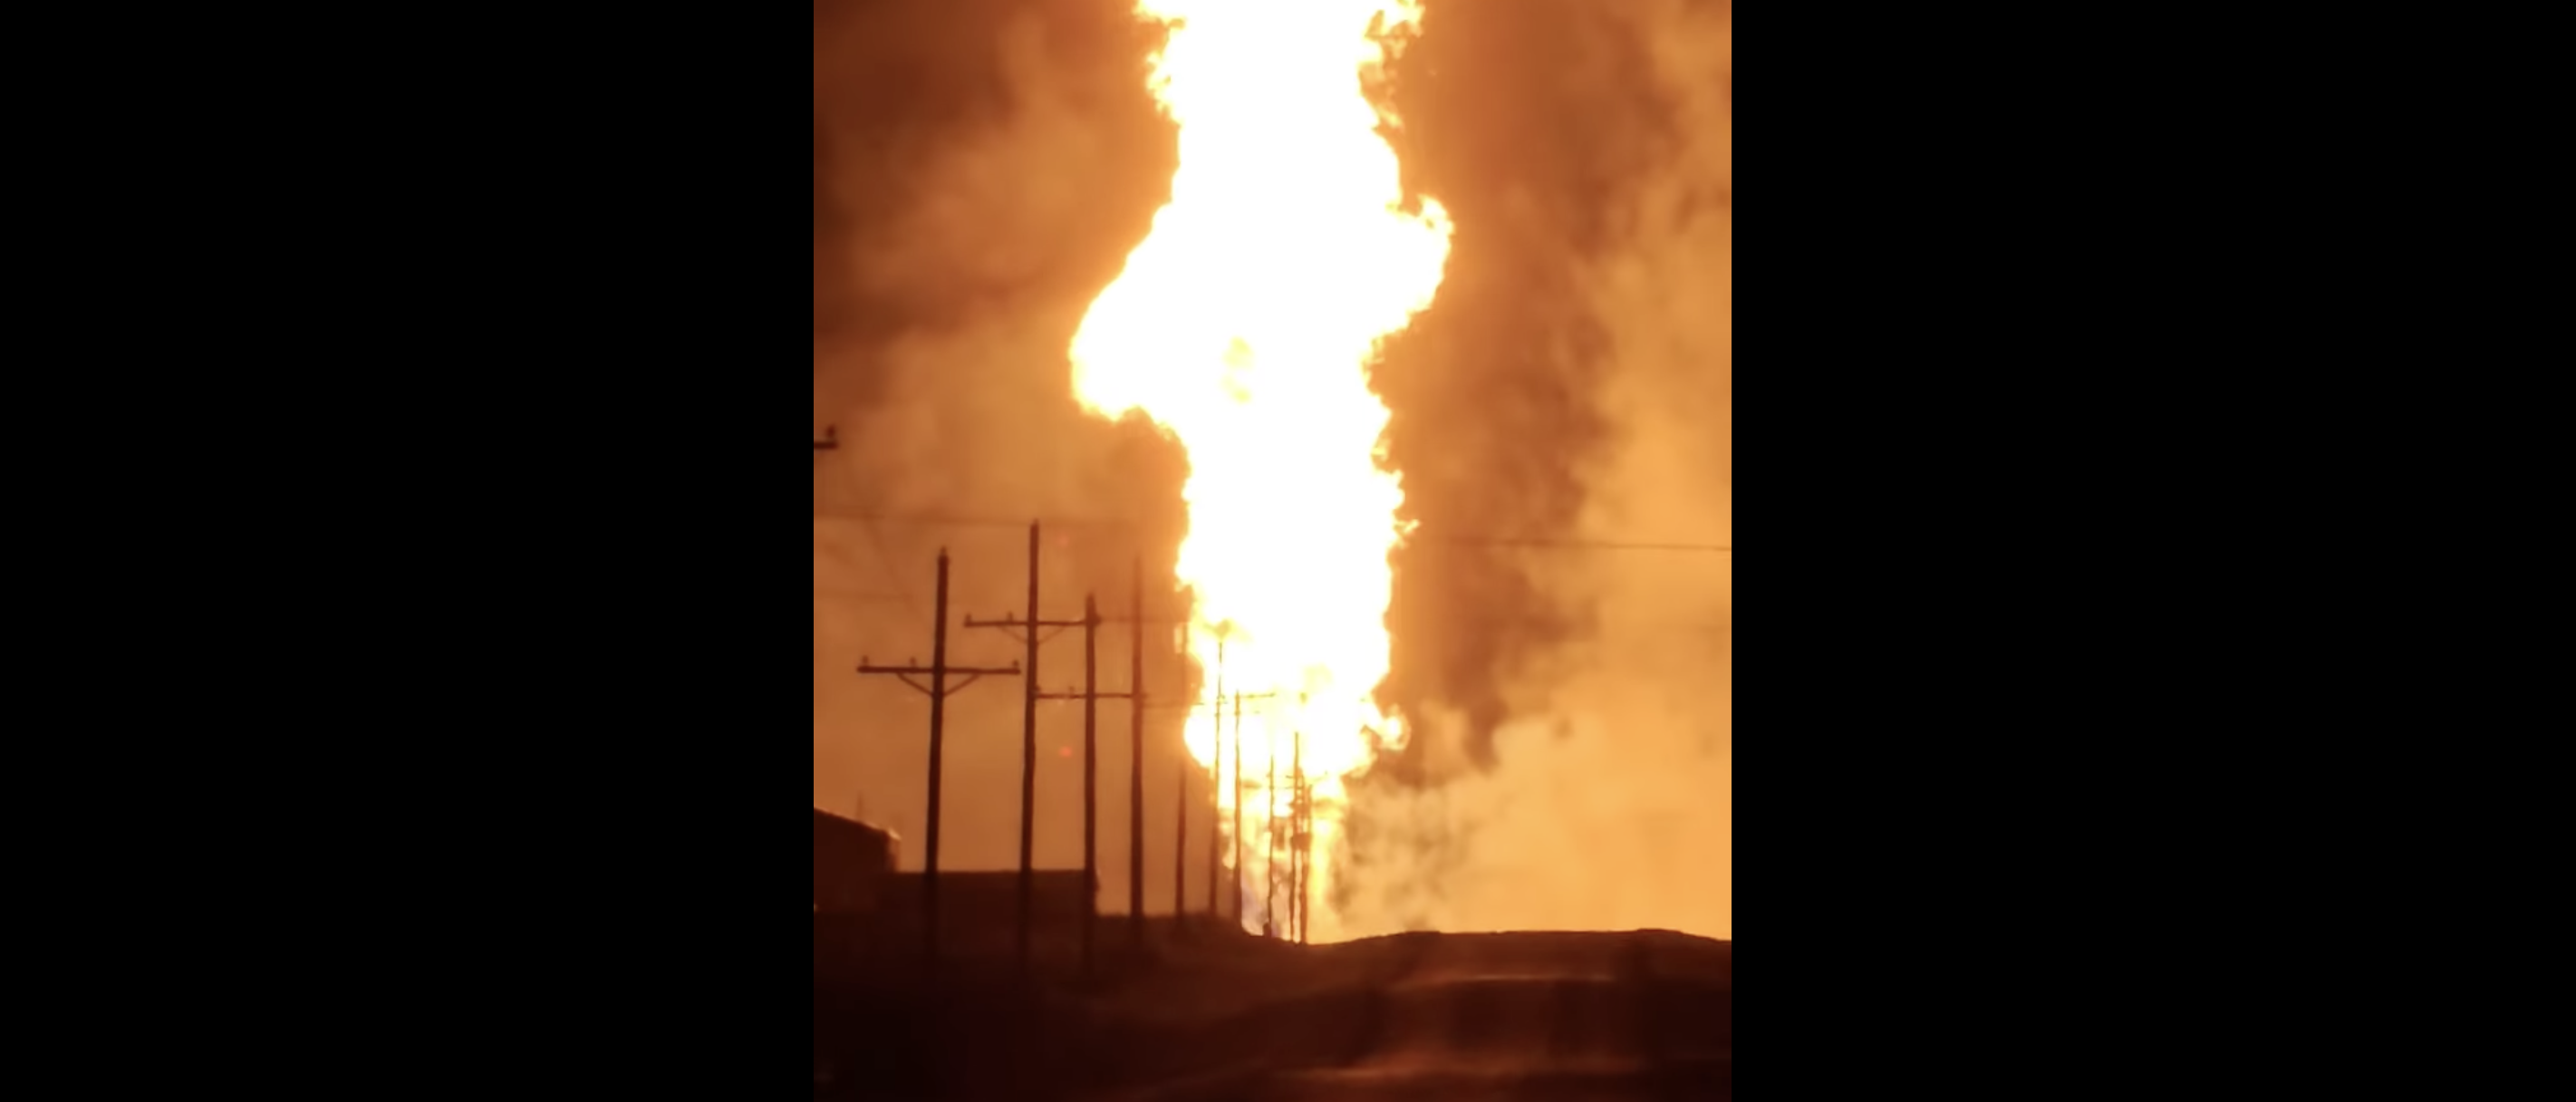 Video Shows Pipeline Explosion Shooting Flames 500 Feet In The Air